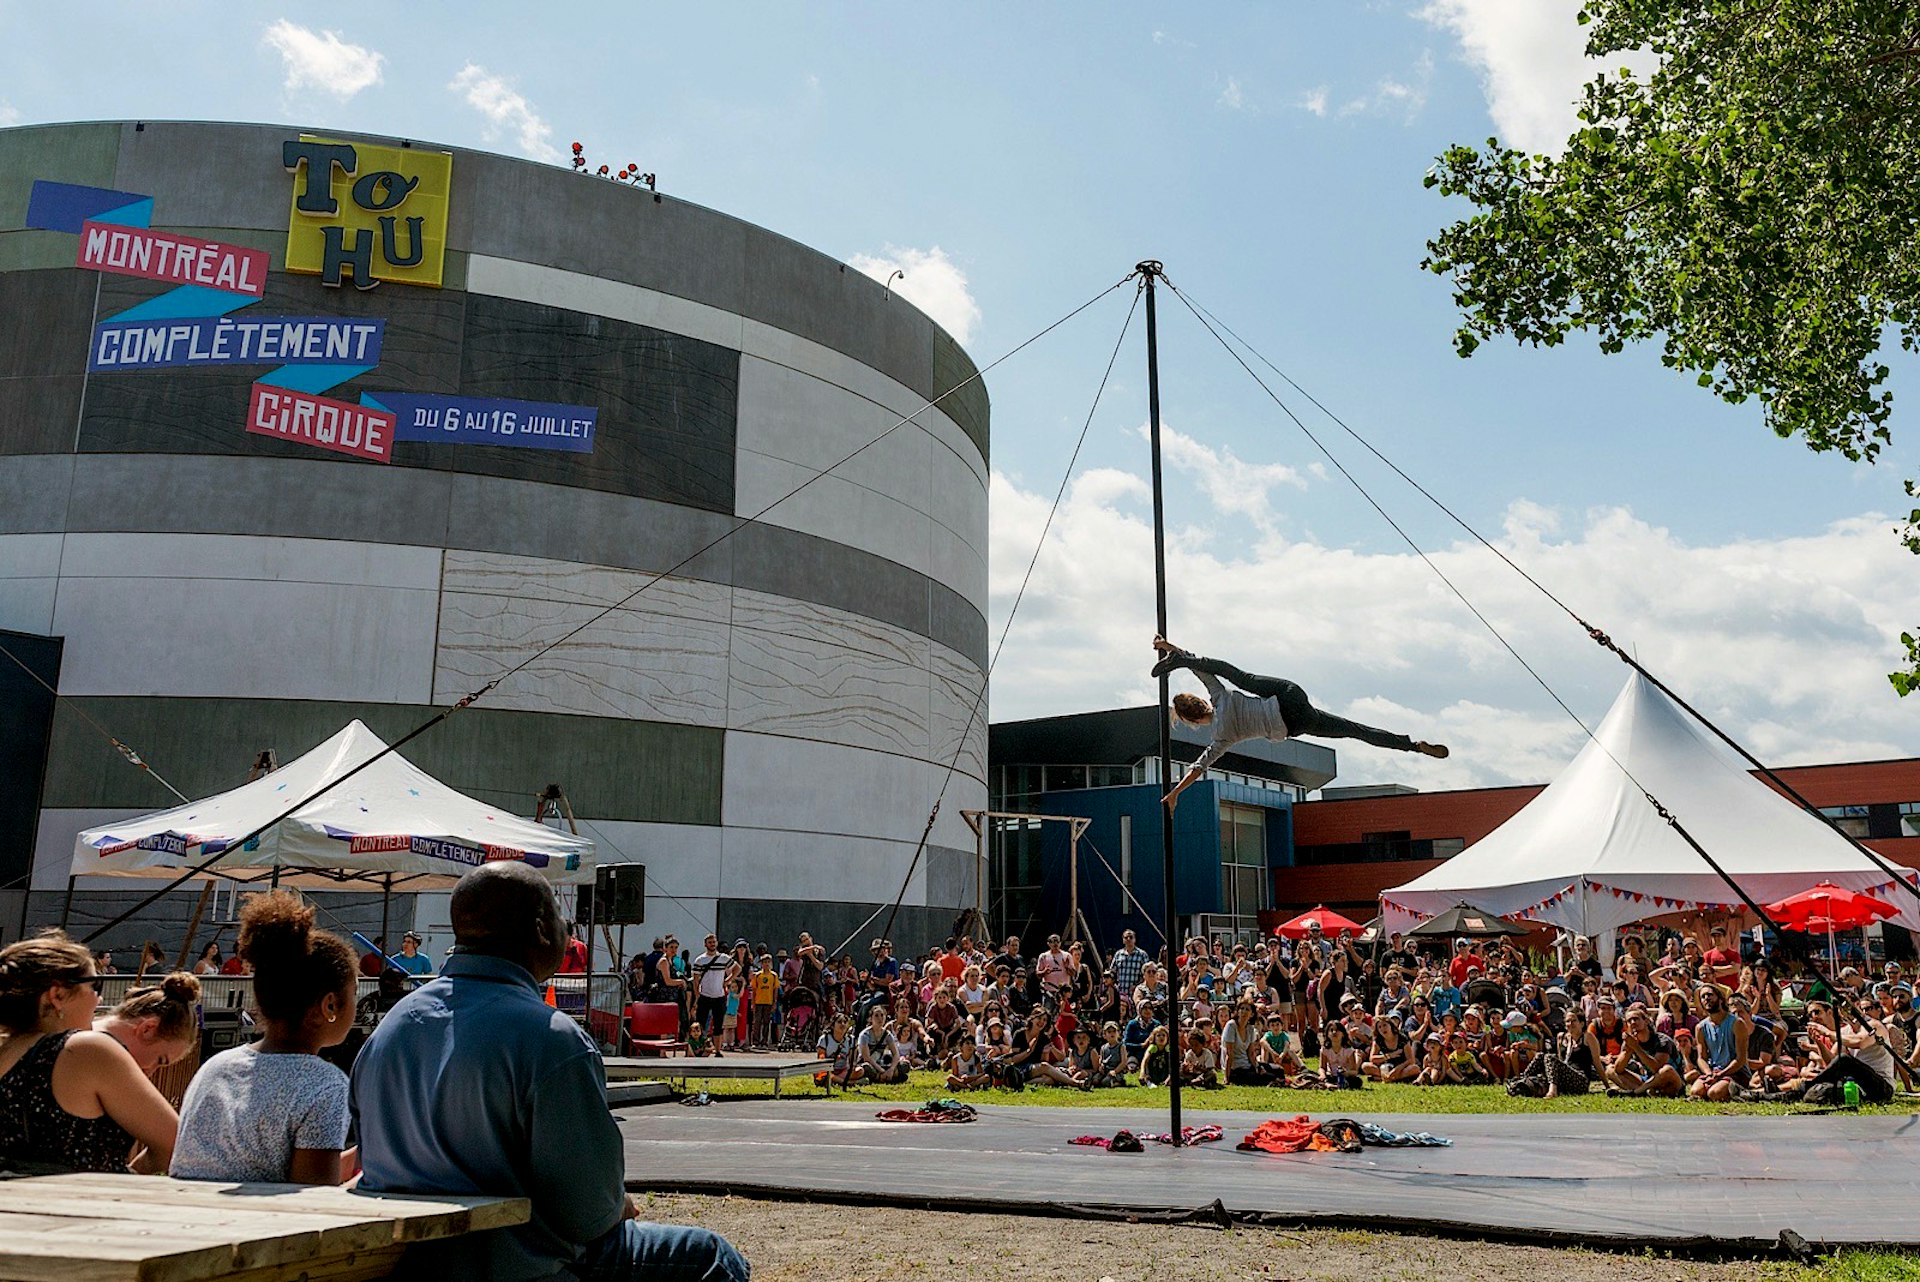 A circus acrobat performs on a vertical pole surrounded by tents and crowds, in front of the circular TOHU building in Montreal